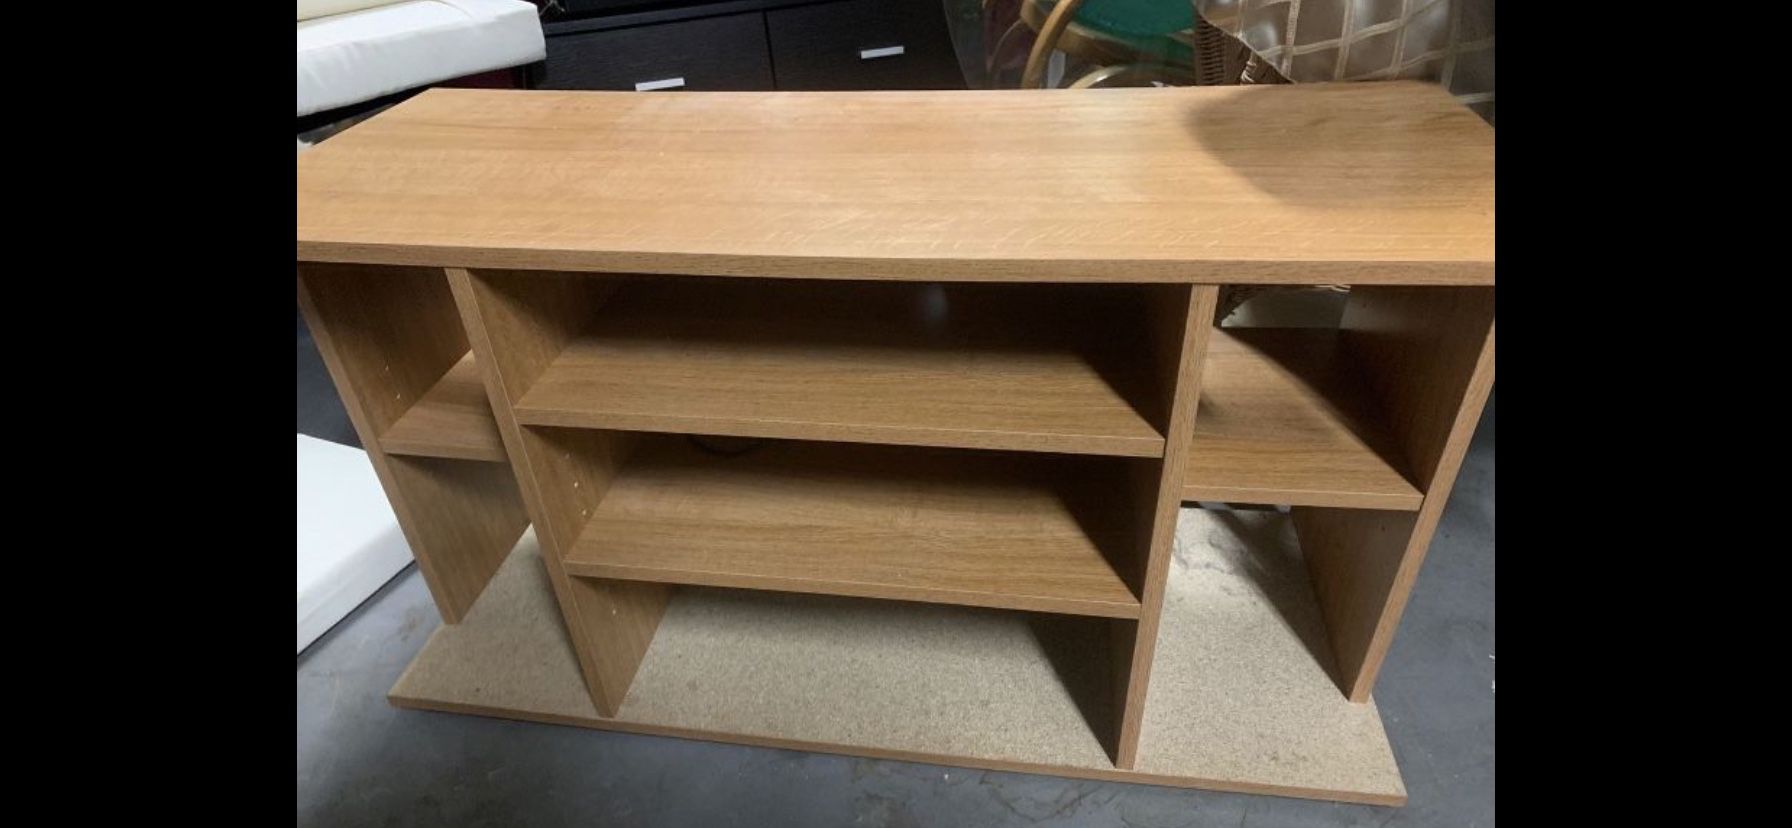 TV Stand With Bookshelves 